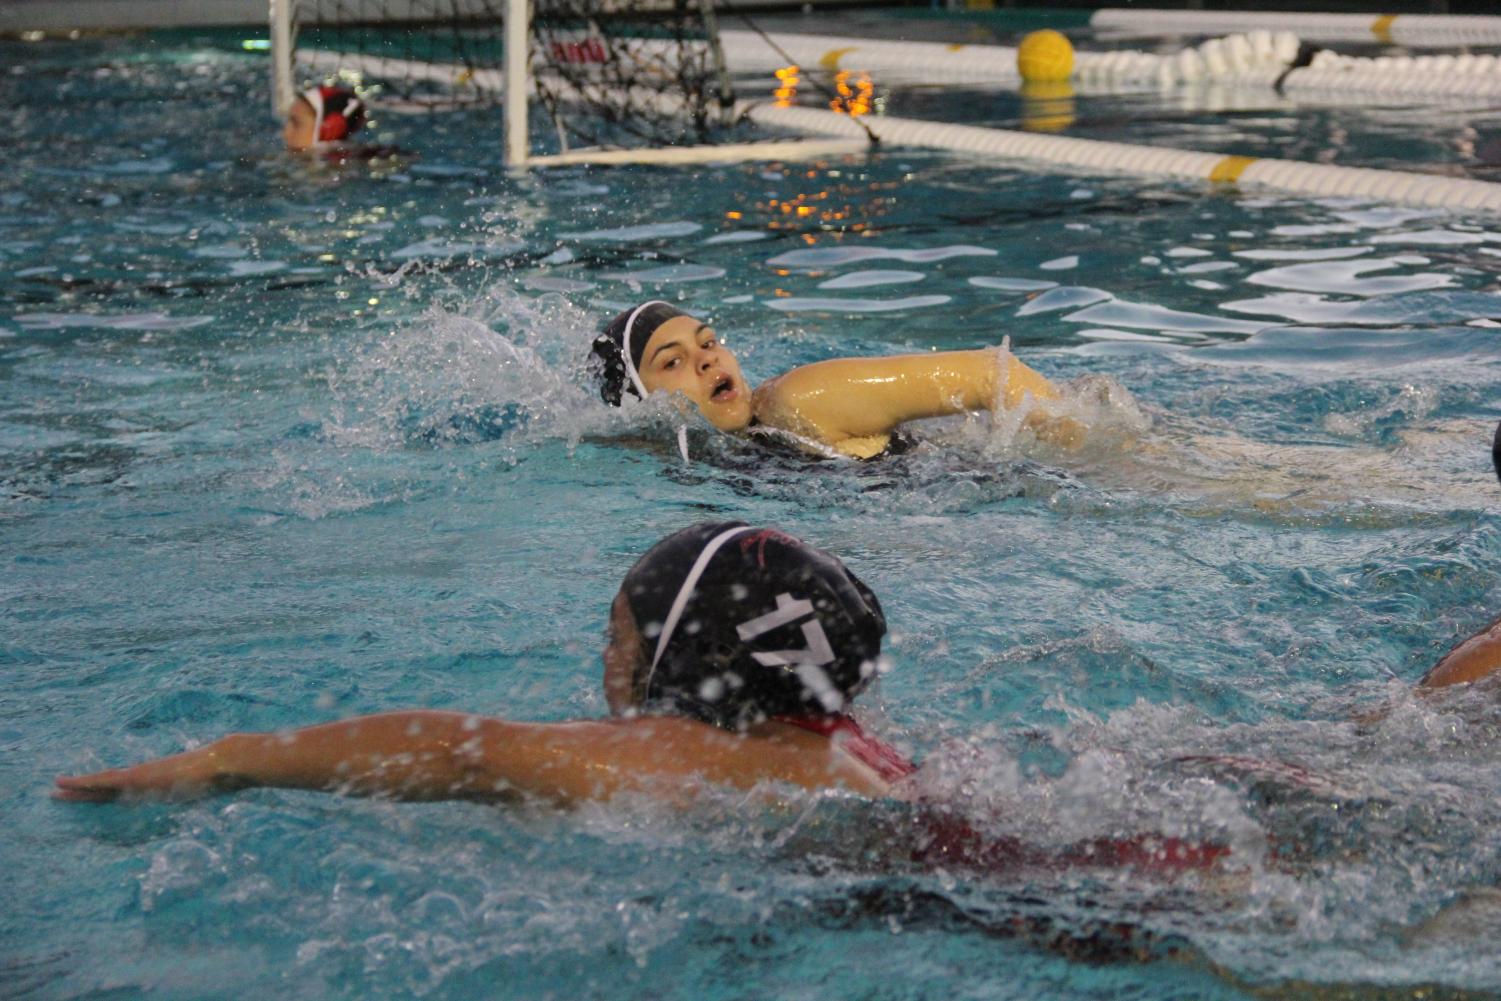 A+Waterpolo+Victory+Against+Terra